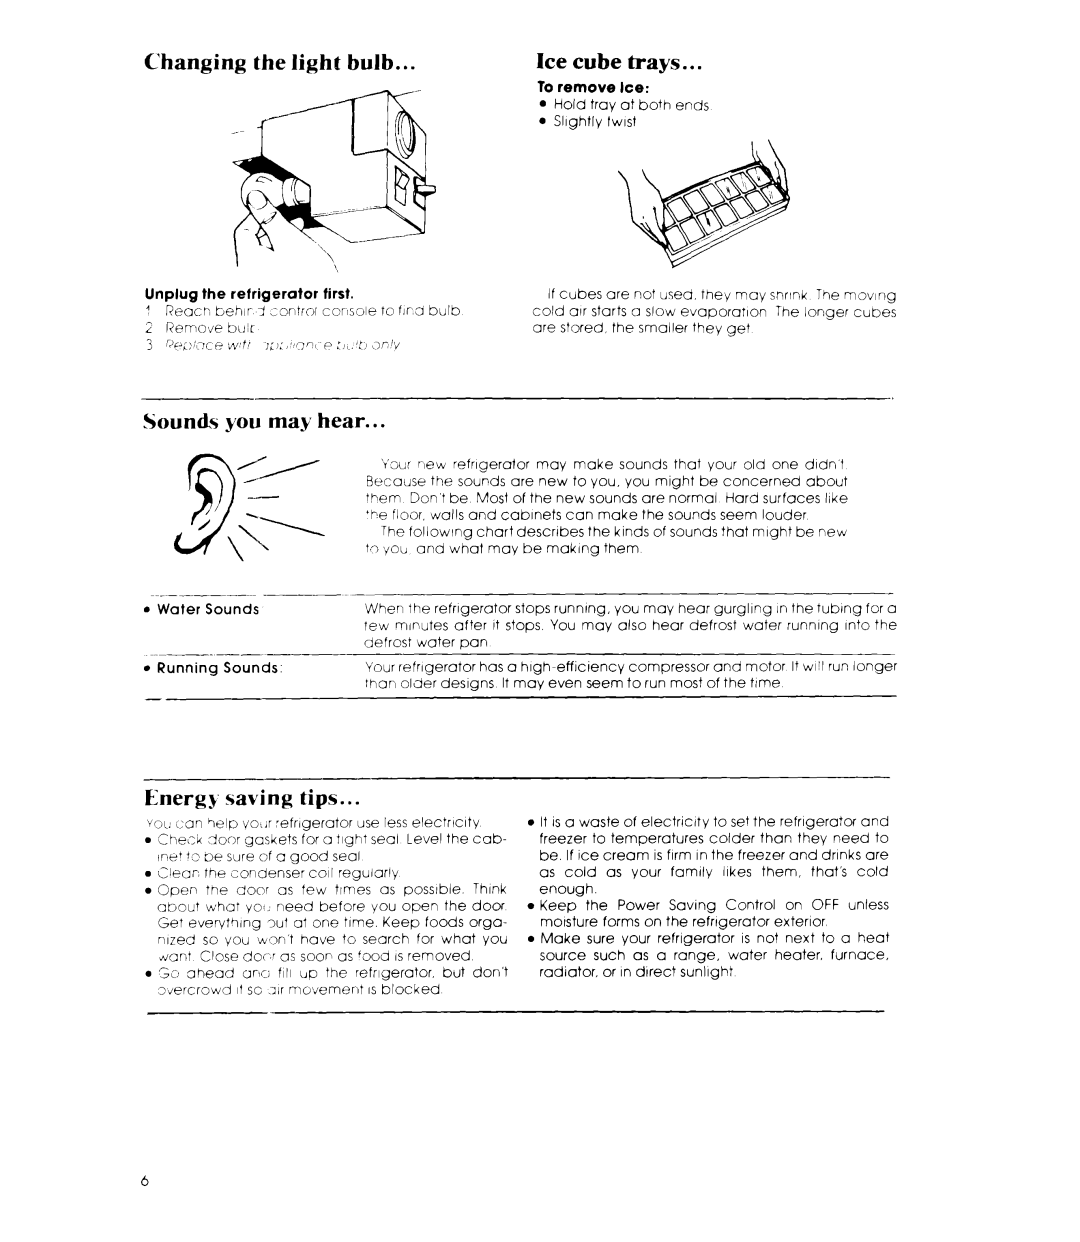 Whirlpool ET14DC, ET12DC manual Changing the light bulb, Ice cube trays, Sounds you may hear, Energy- saving tips, ~~~ 